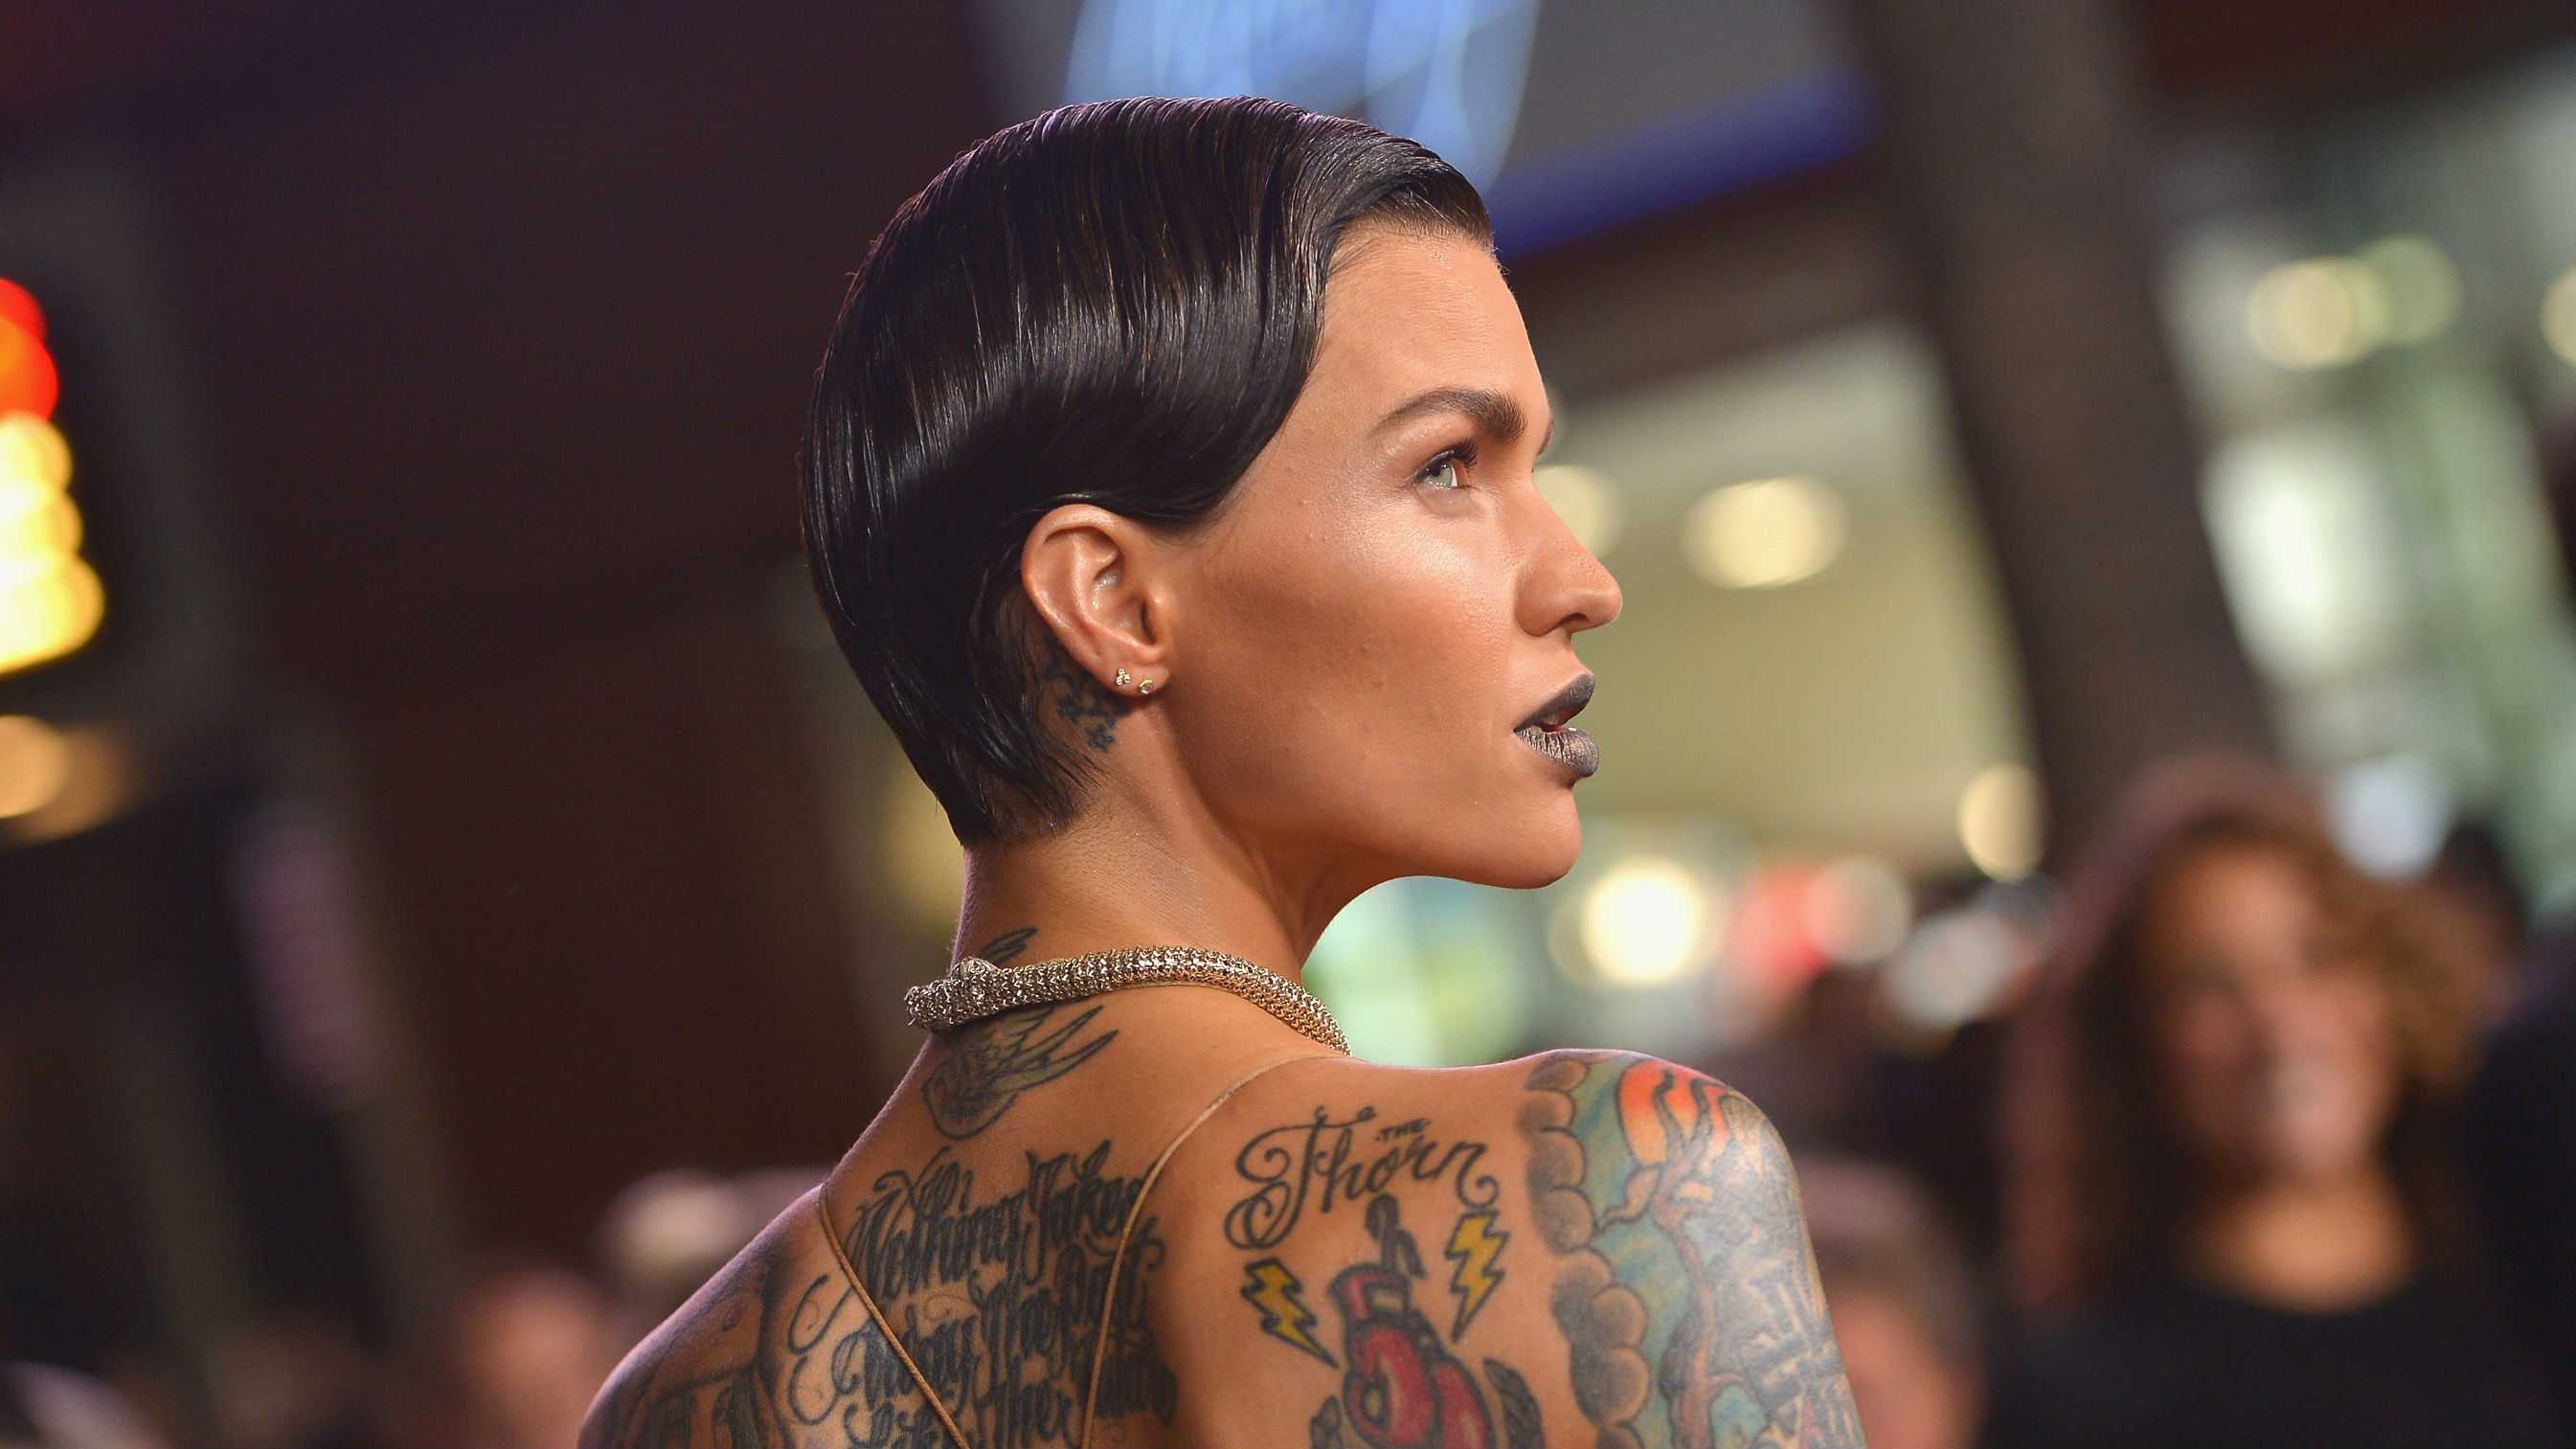 70+ Hot Pictures Of Ruby Rose – Batgirl In Arrowverse And Orange Is The New Black Star. 47